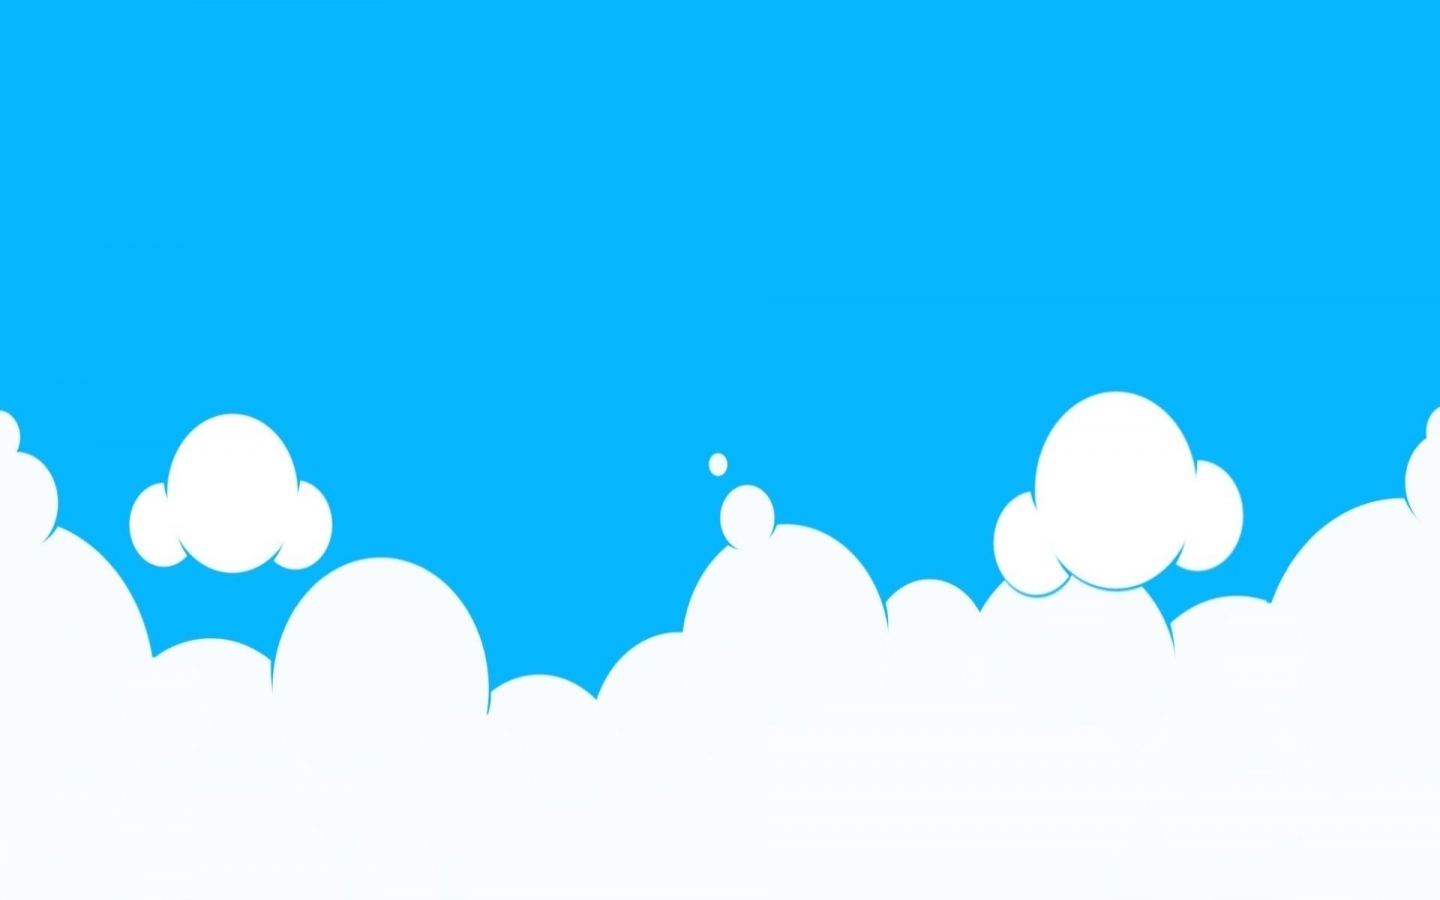 Blue Clouds Background   Clipart Panda   Free Clipart Images